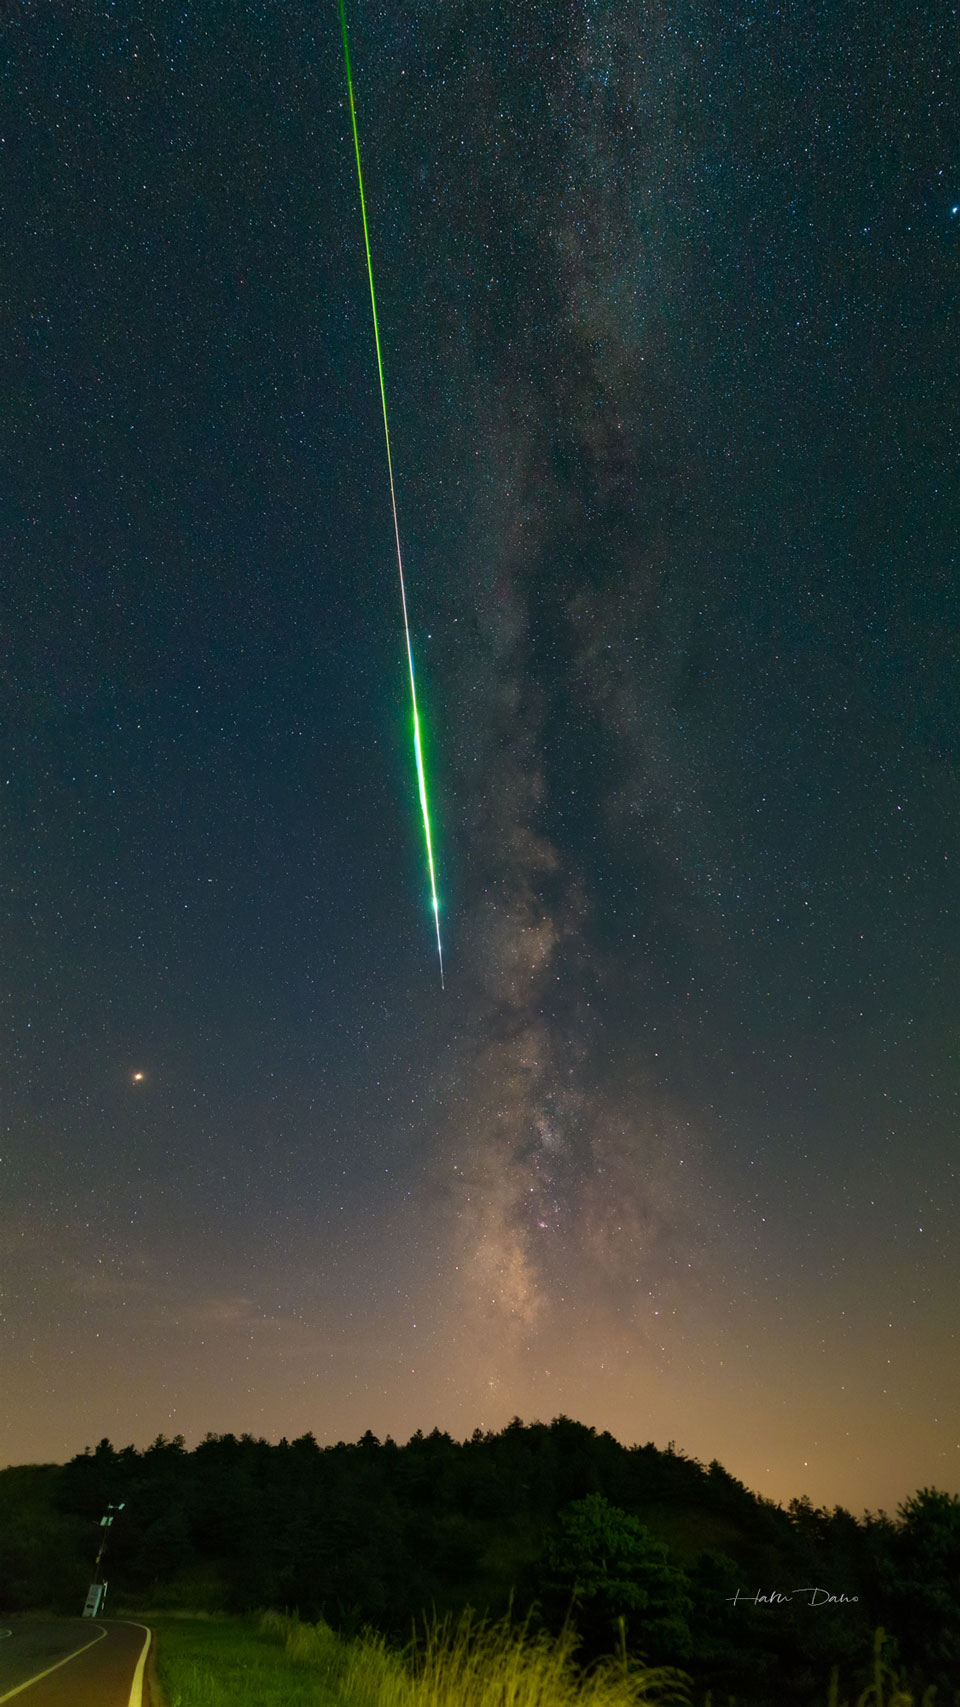 The picture shows a bright meteor from the 2018 Perseids 
meteor shower along the Milky Way Galaxy. 
Please see the explanation for more detailed information.